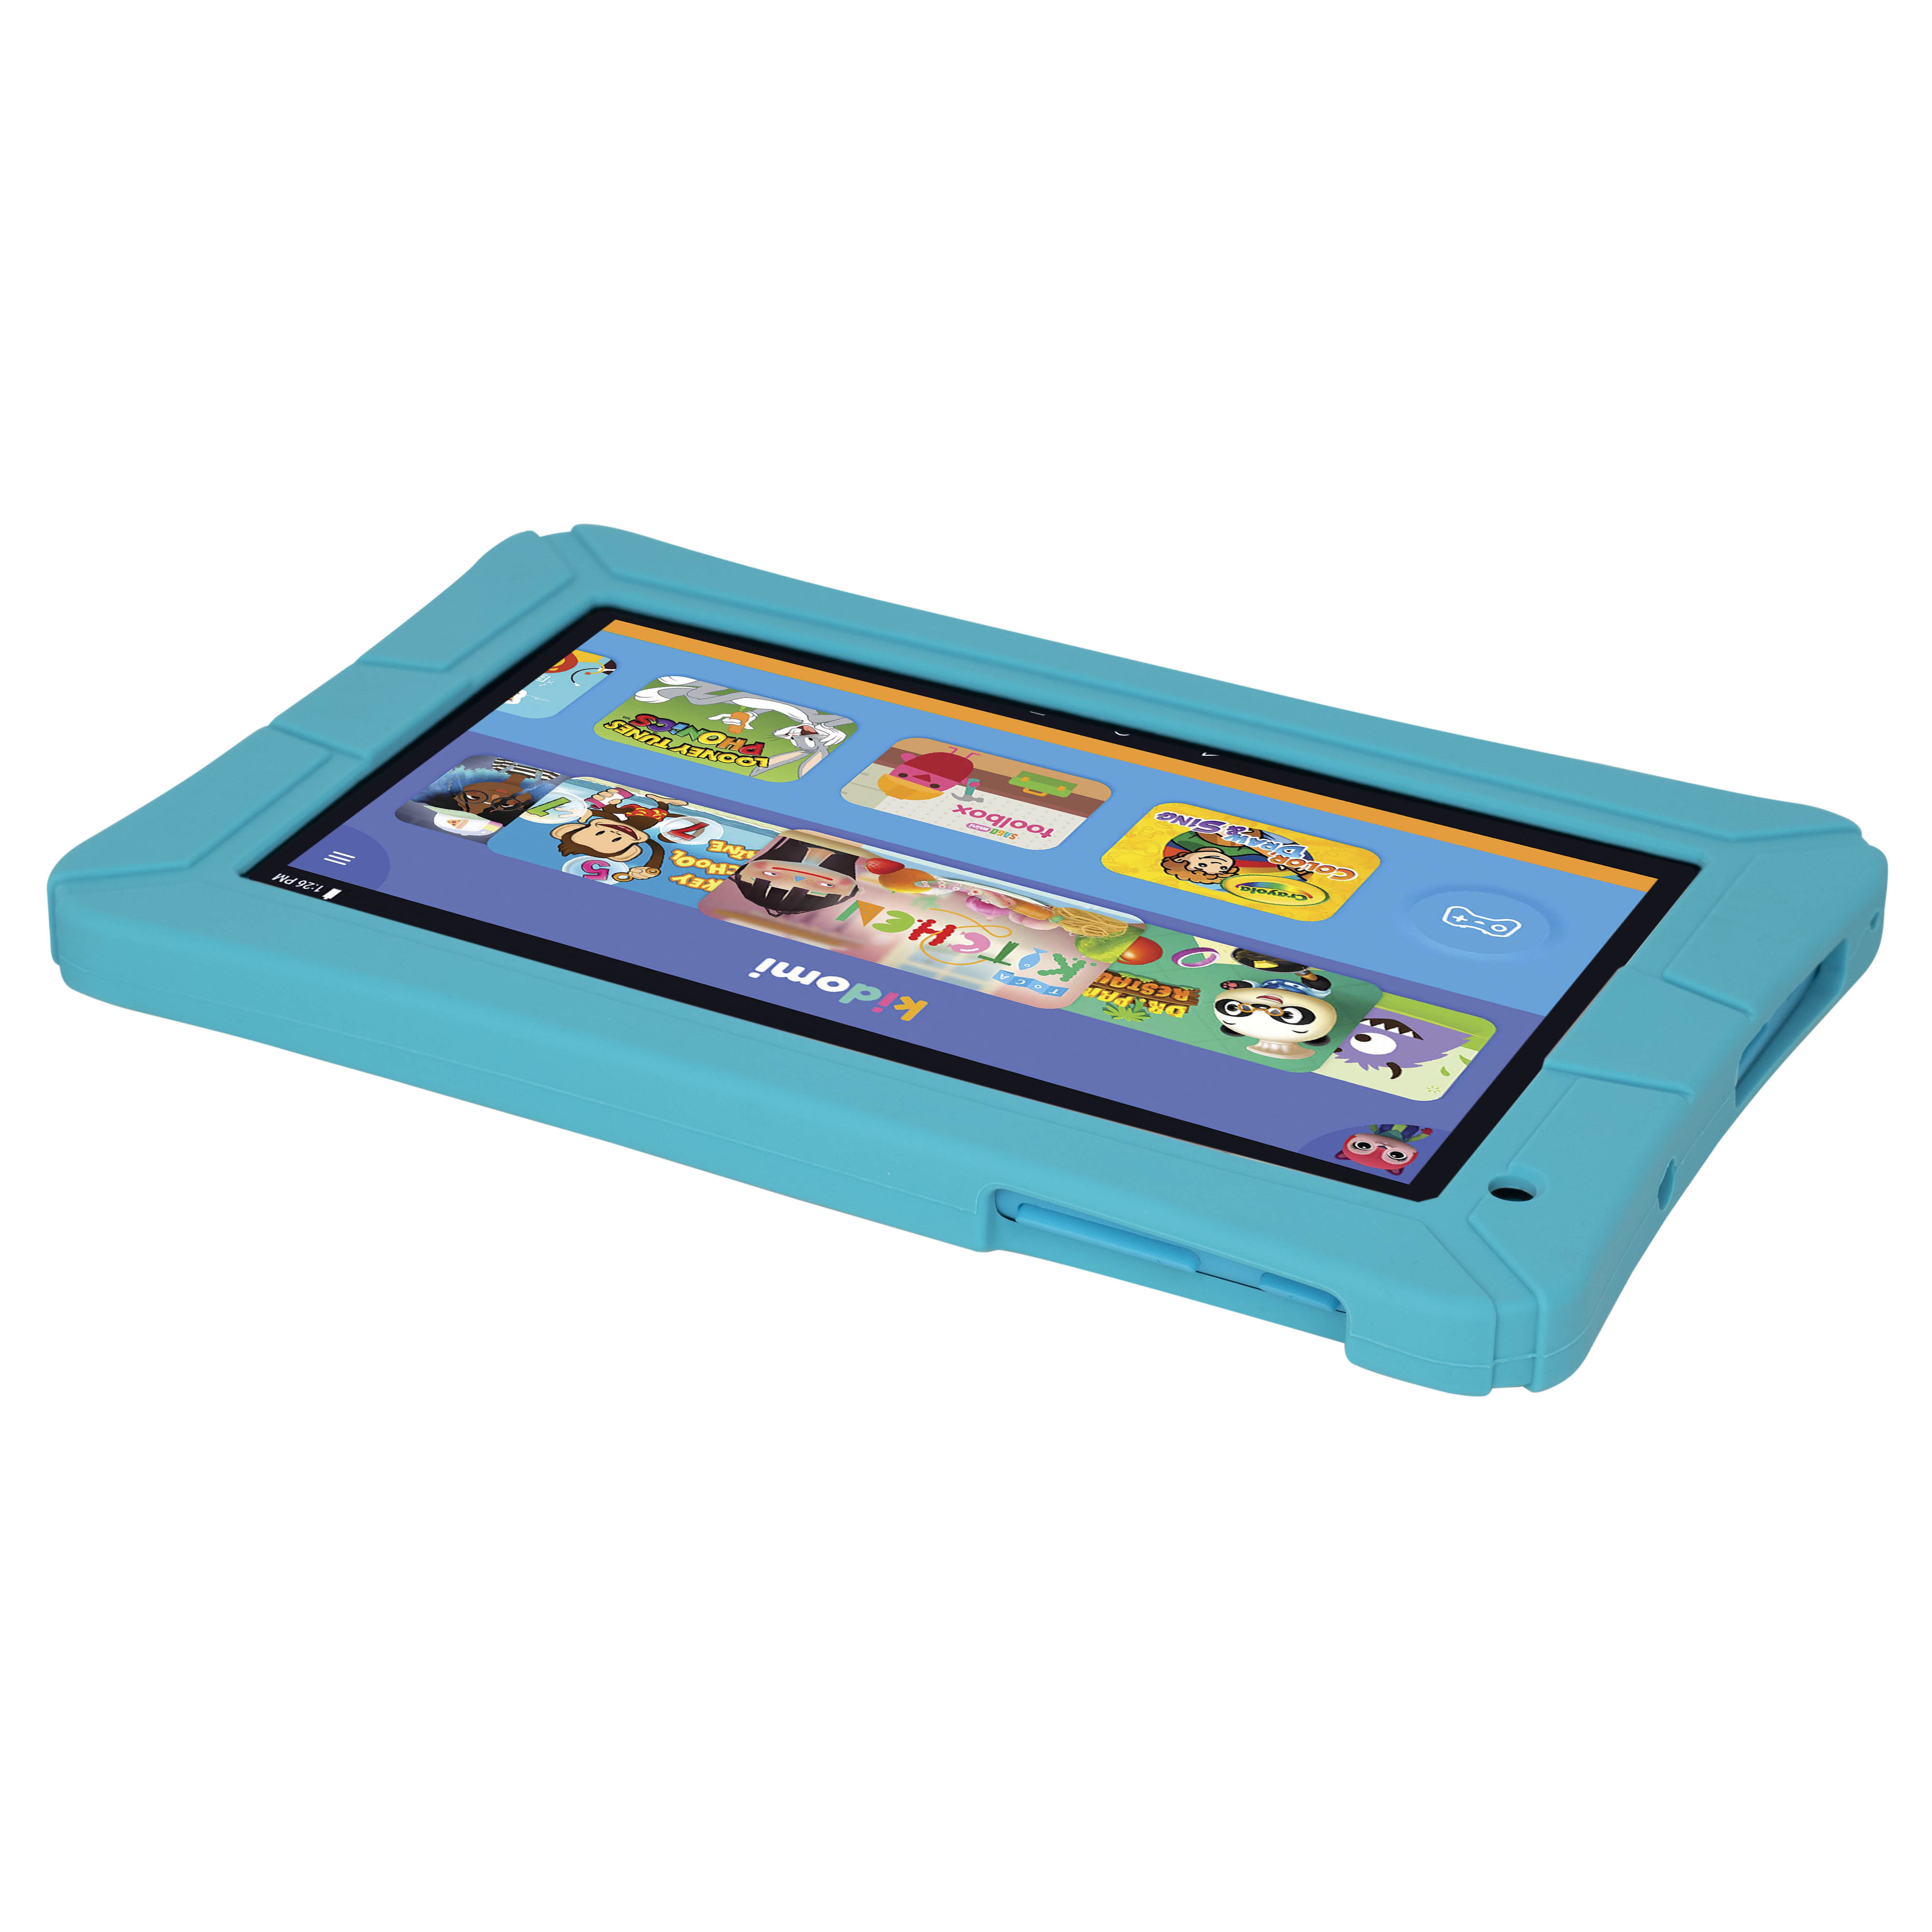 HighQ 7" Learning Tab Jr. featuring Kidomi, Gel Case Included, Quad Core Processor, 8GB Storage, Android 8.1 Go Edition, Dual Cameras, Kidomi Free Trial Included, Blue - image 5 of 8